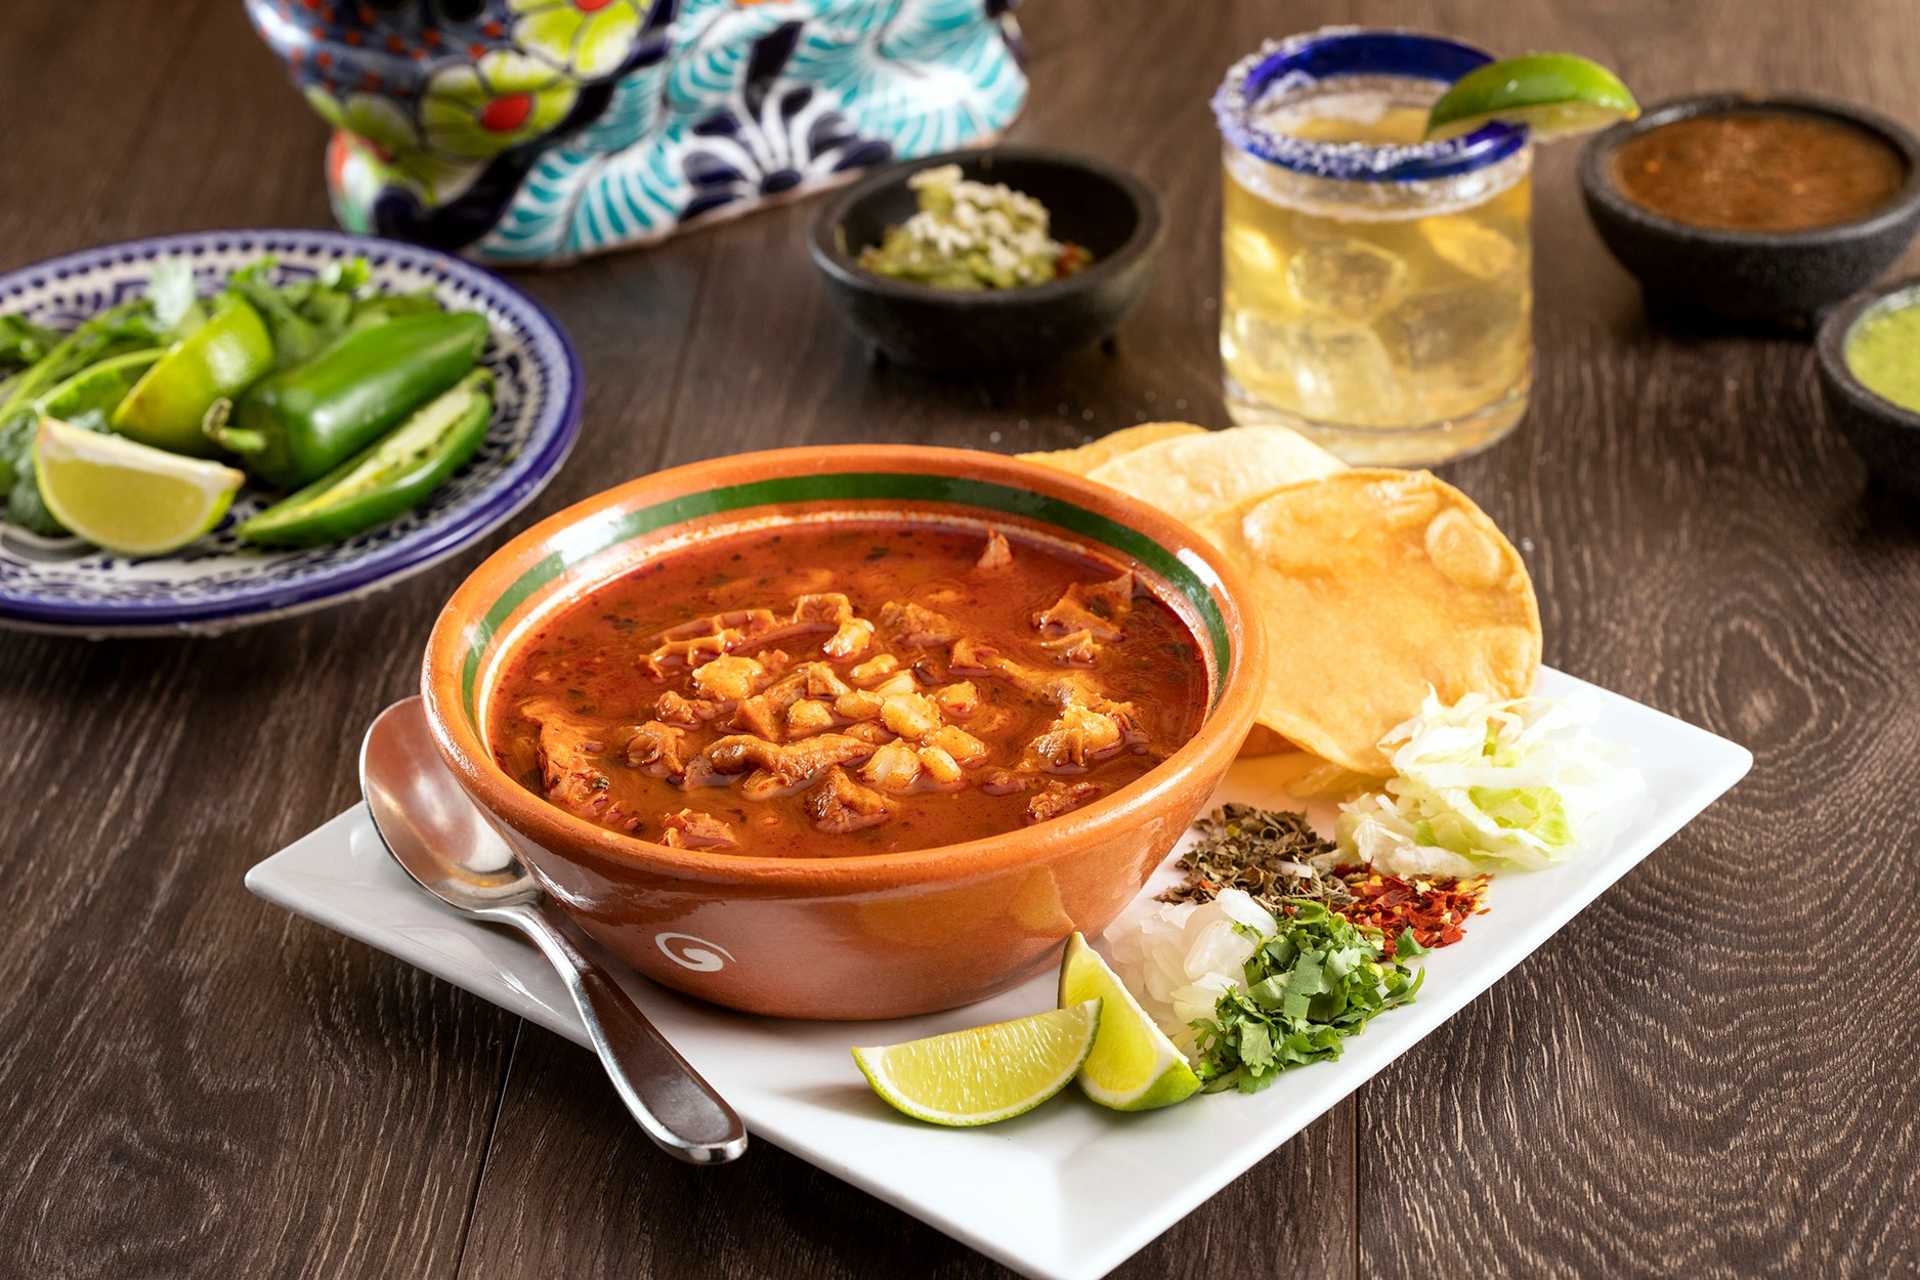 Pozole rojo on the menu at Leticia’s Cocina &amp; Cantina, coming soon to the Sunset Station resort.